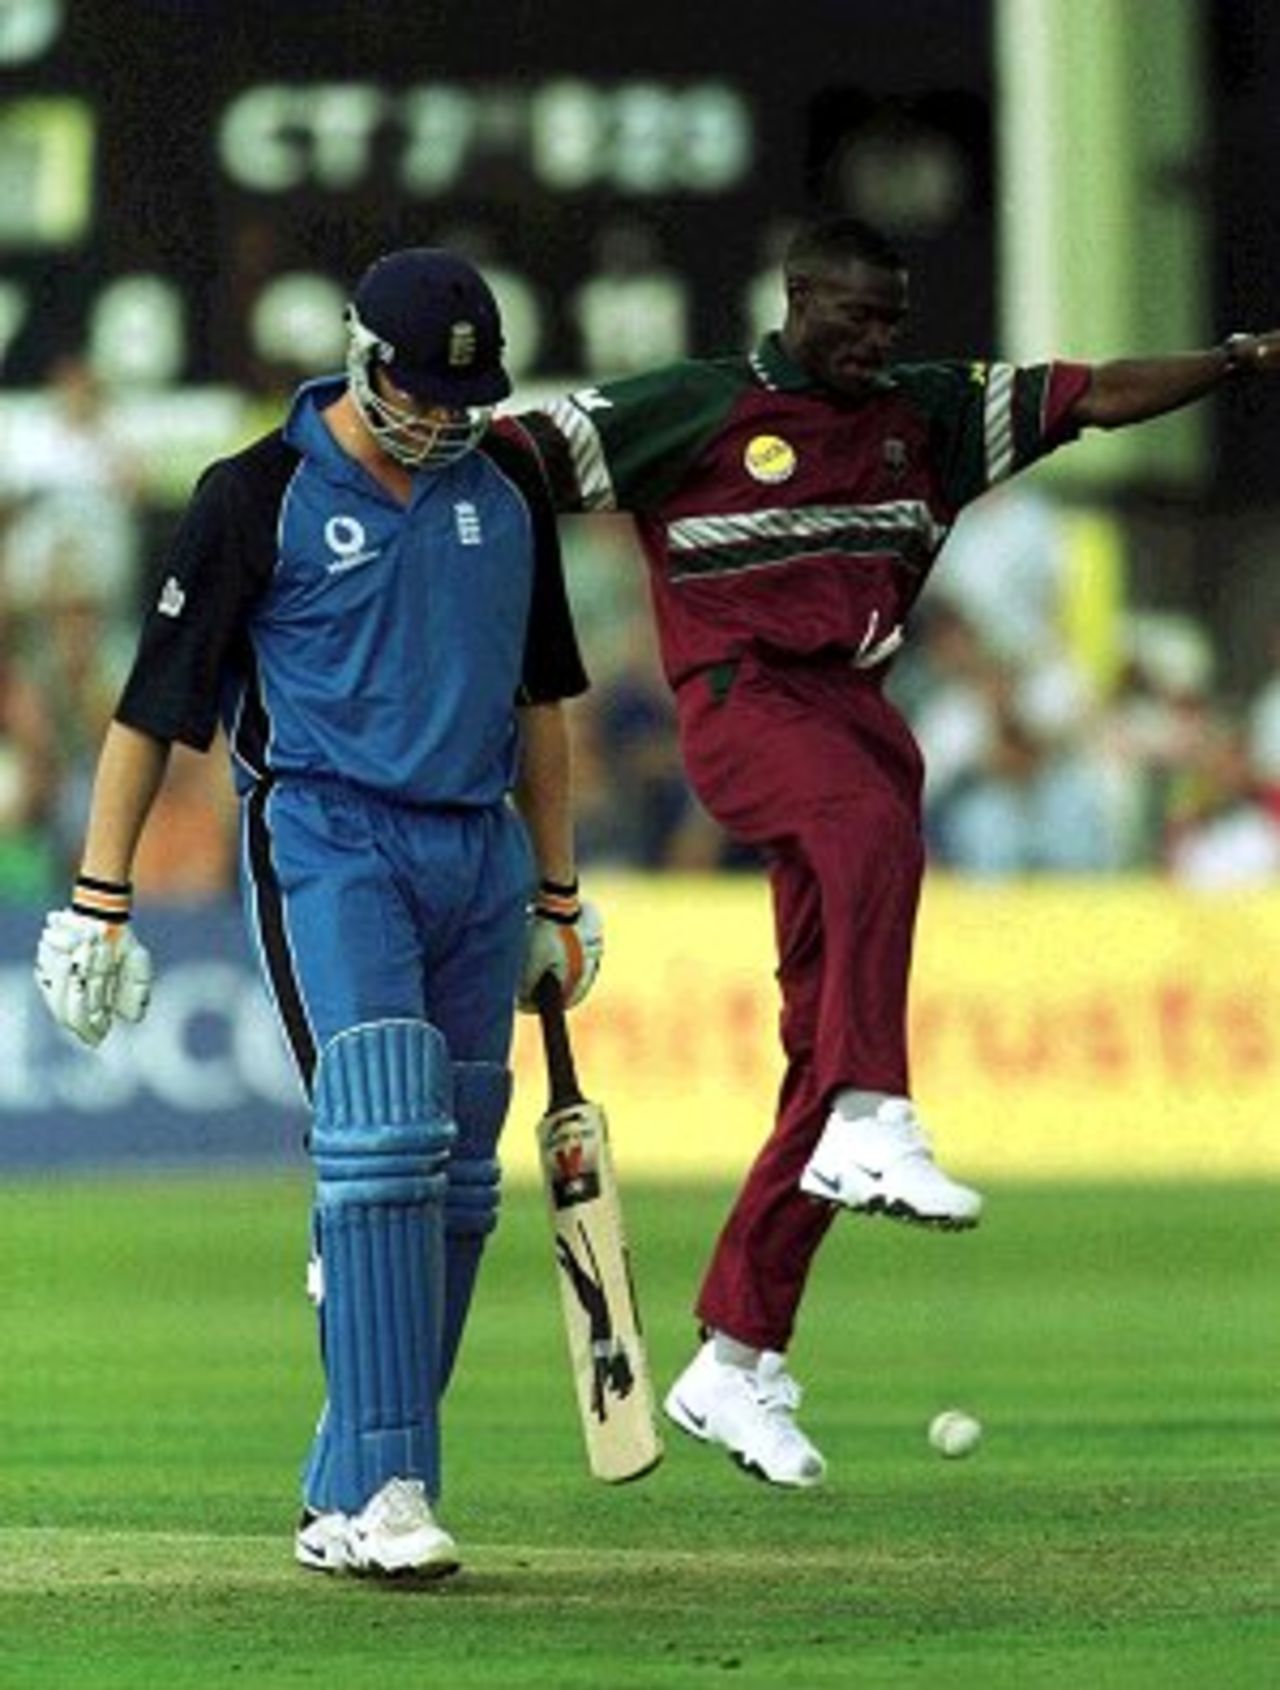 20 Jul 2000: Andrew Flintoff of England is out to Reon King caught by Ridley Jacobs for 2 during the NatWest Series One Day International between England and West Indies at Trent Bridge, Nottingham.